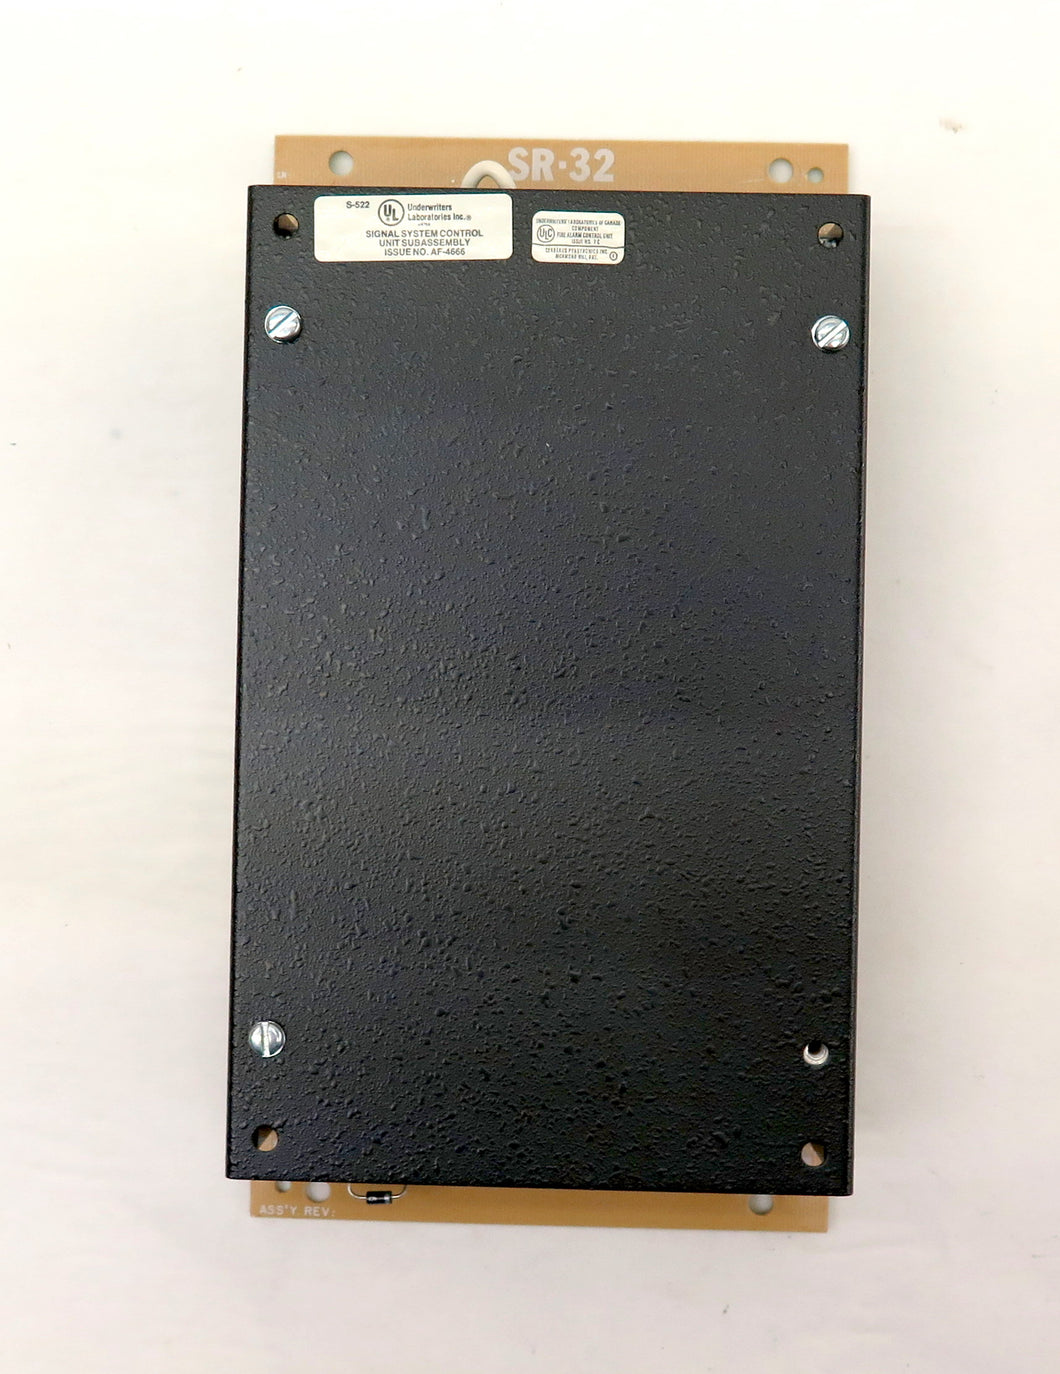 Siemens SR-32 Relay Board For System 3 - Advance Operations